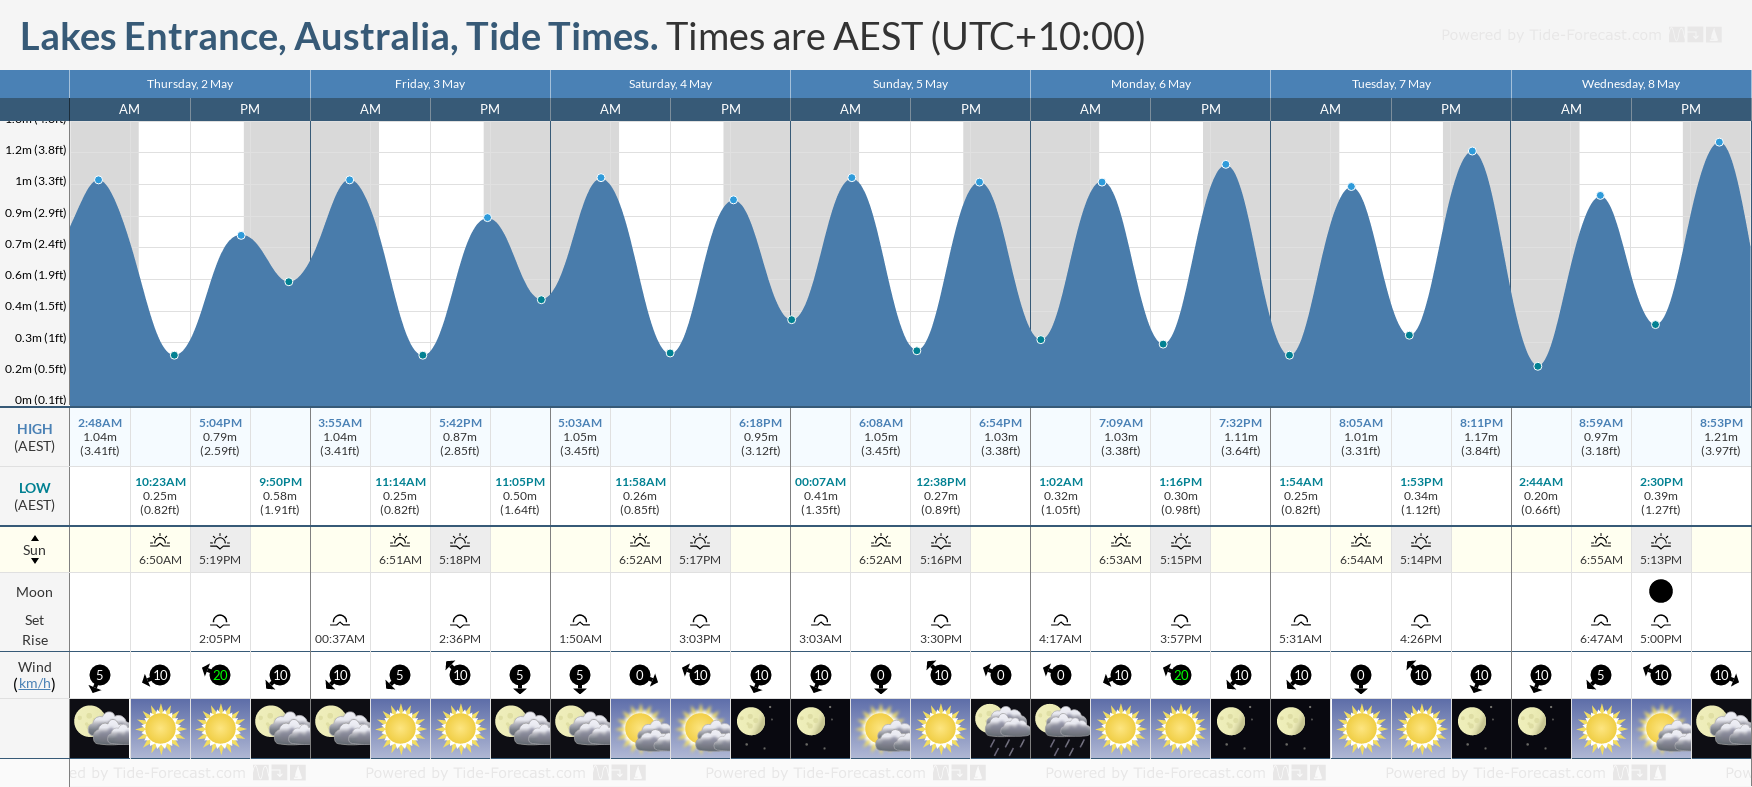 Lakes Entrance, Australia Tide Chart including high and low tide tide times for the next 7 days